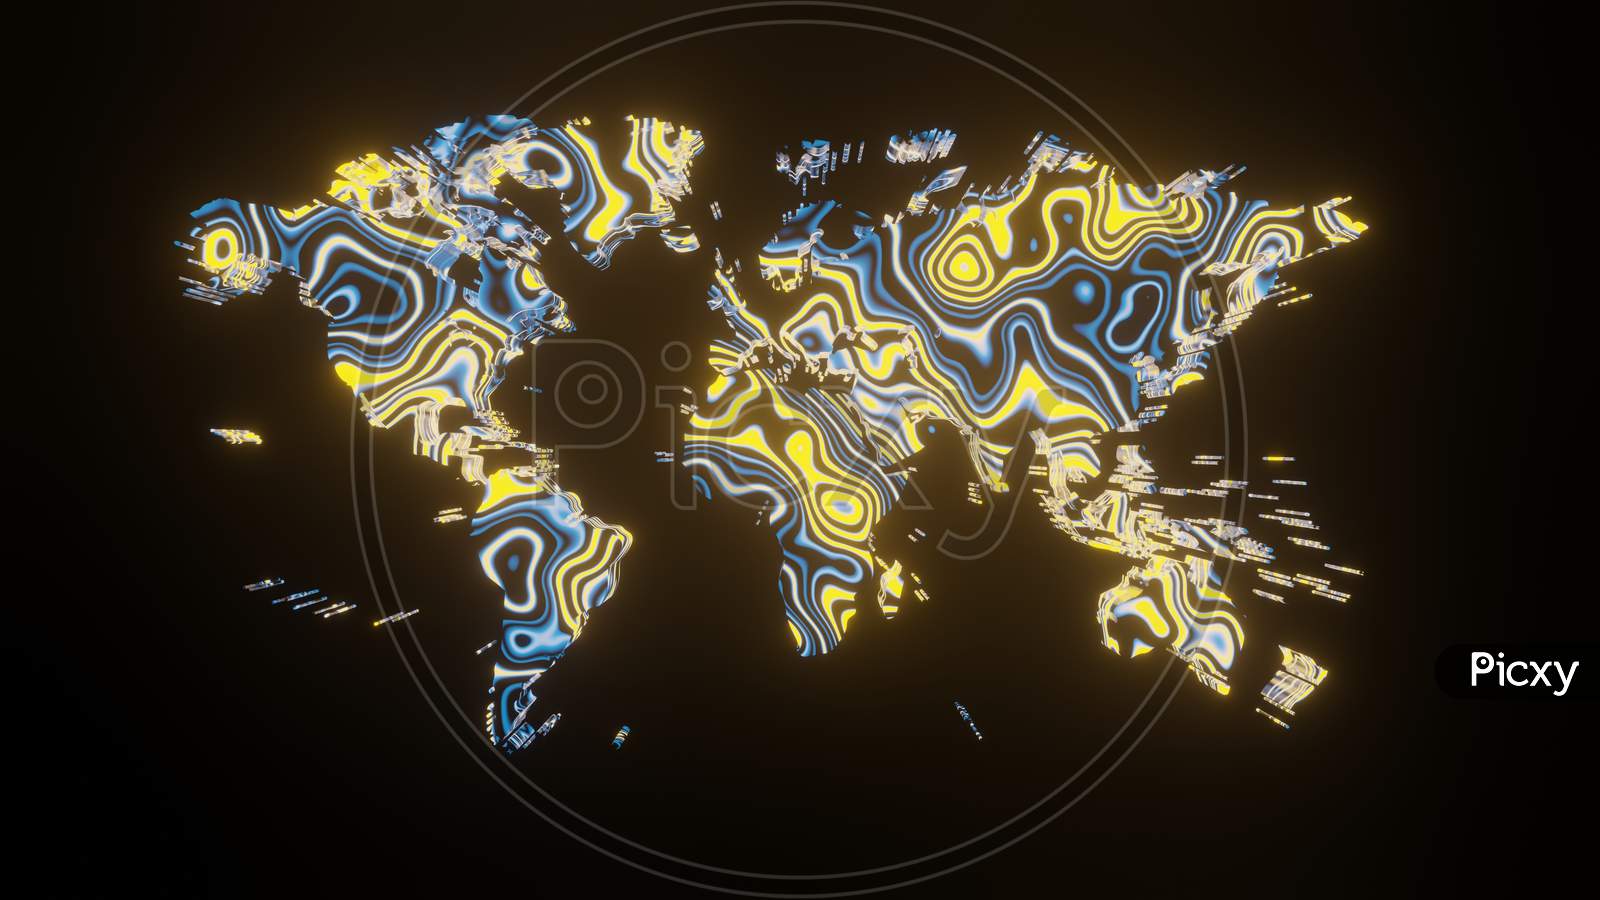 Illustration Graphic Of Beautiful Texture Or Pattern Formation On The World Map, Isolated On Black Background. 3D Abstract Loop Neon Lighting Effect On World Map.